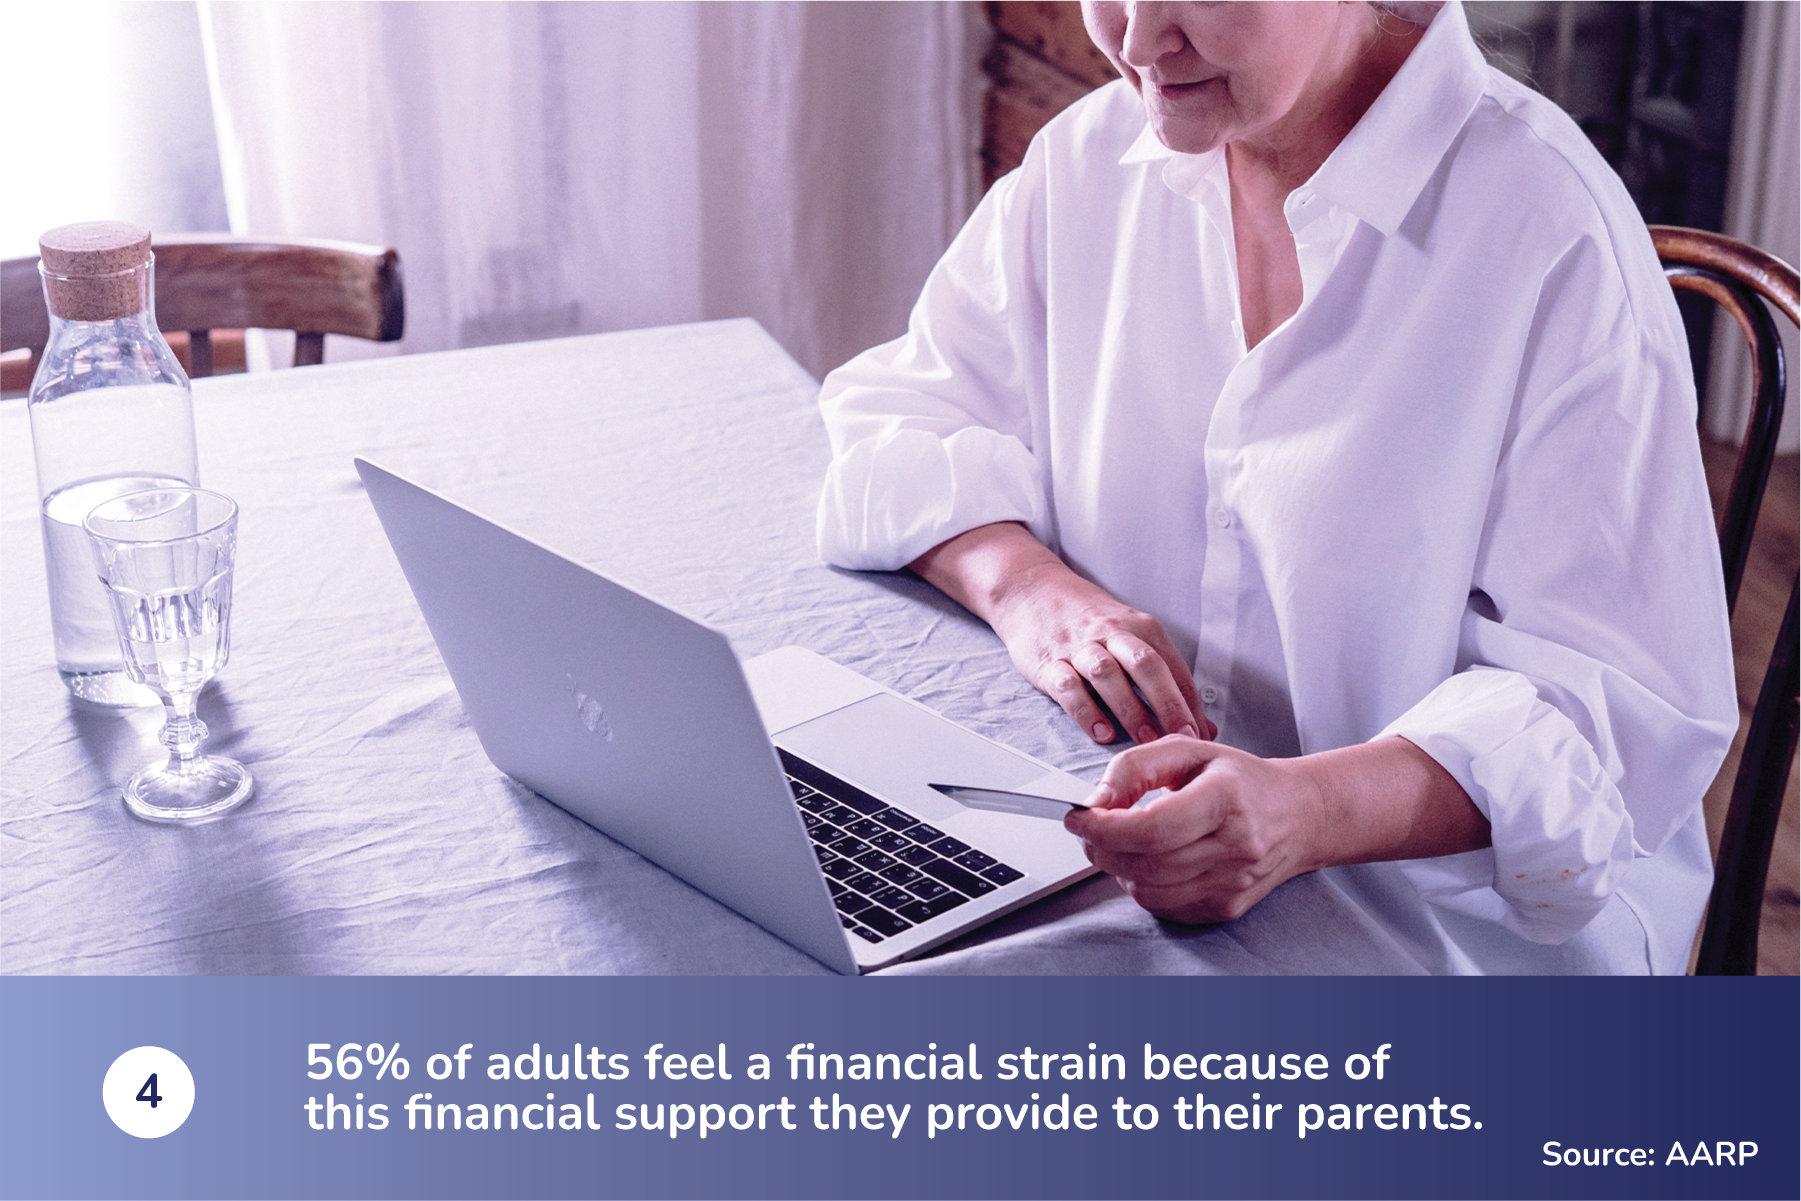 56% of adults feel a financial strain because of this financial support they provide to their parents